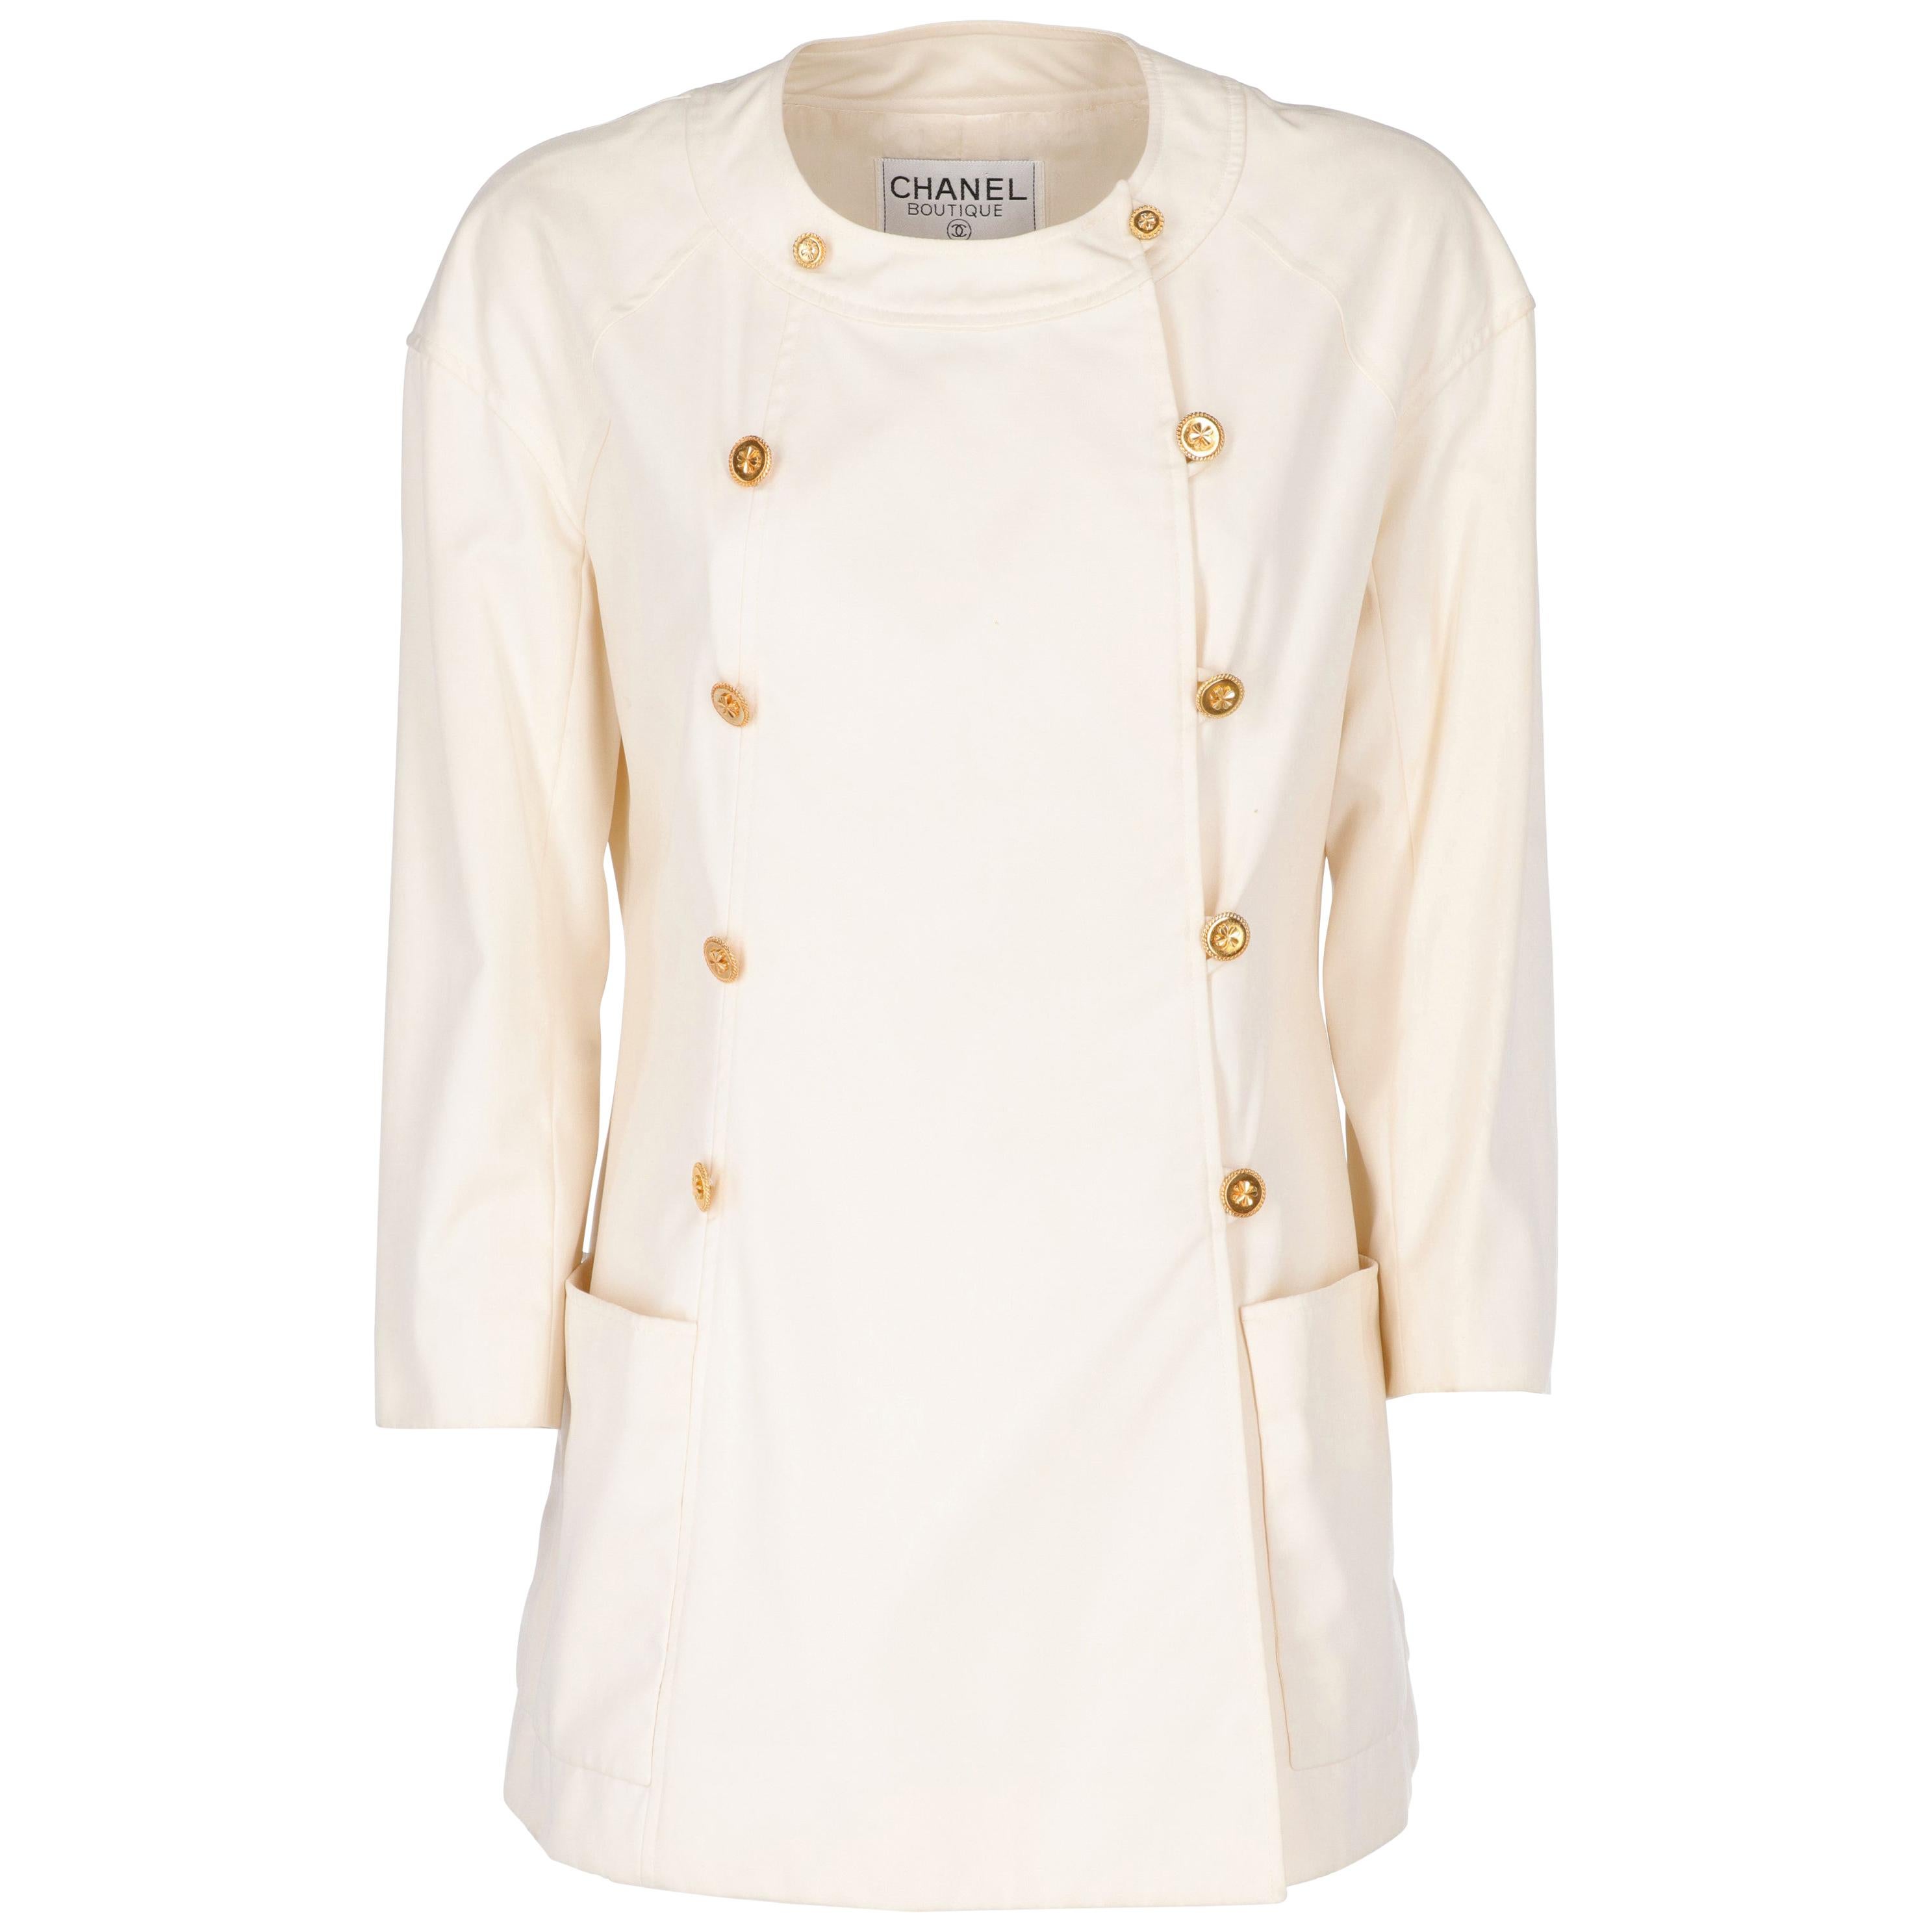 1980s Chanel Ivory Cotton Double Breasted Jacket